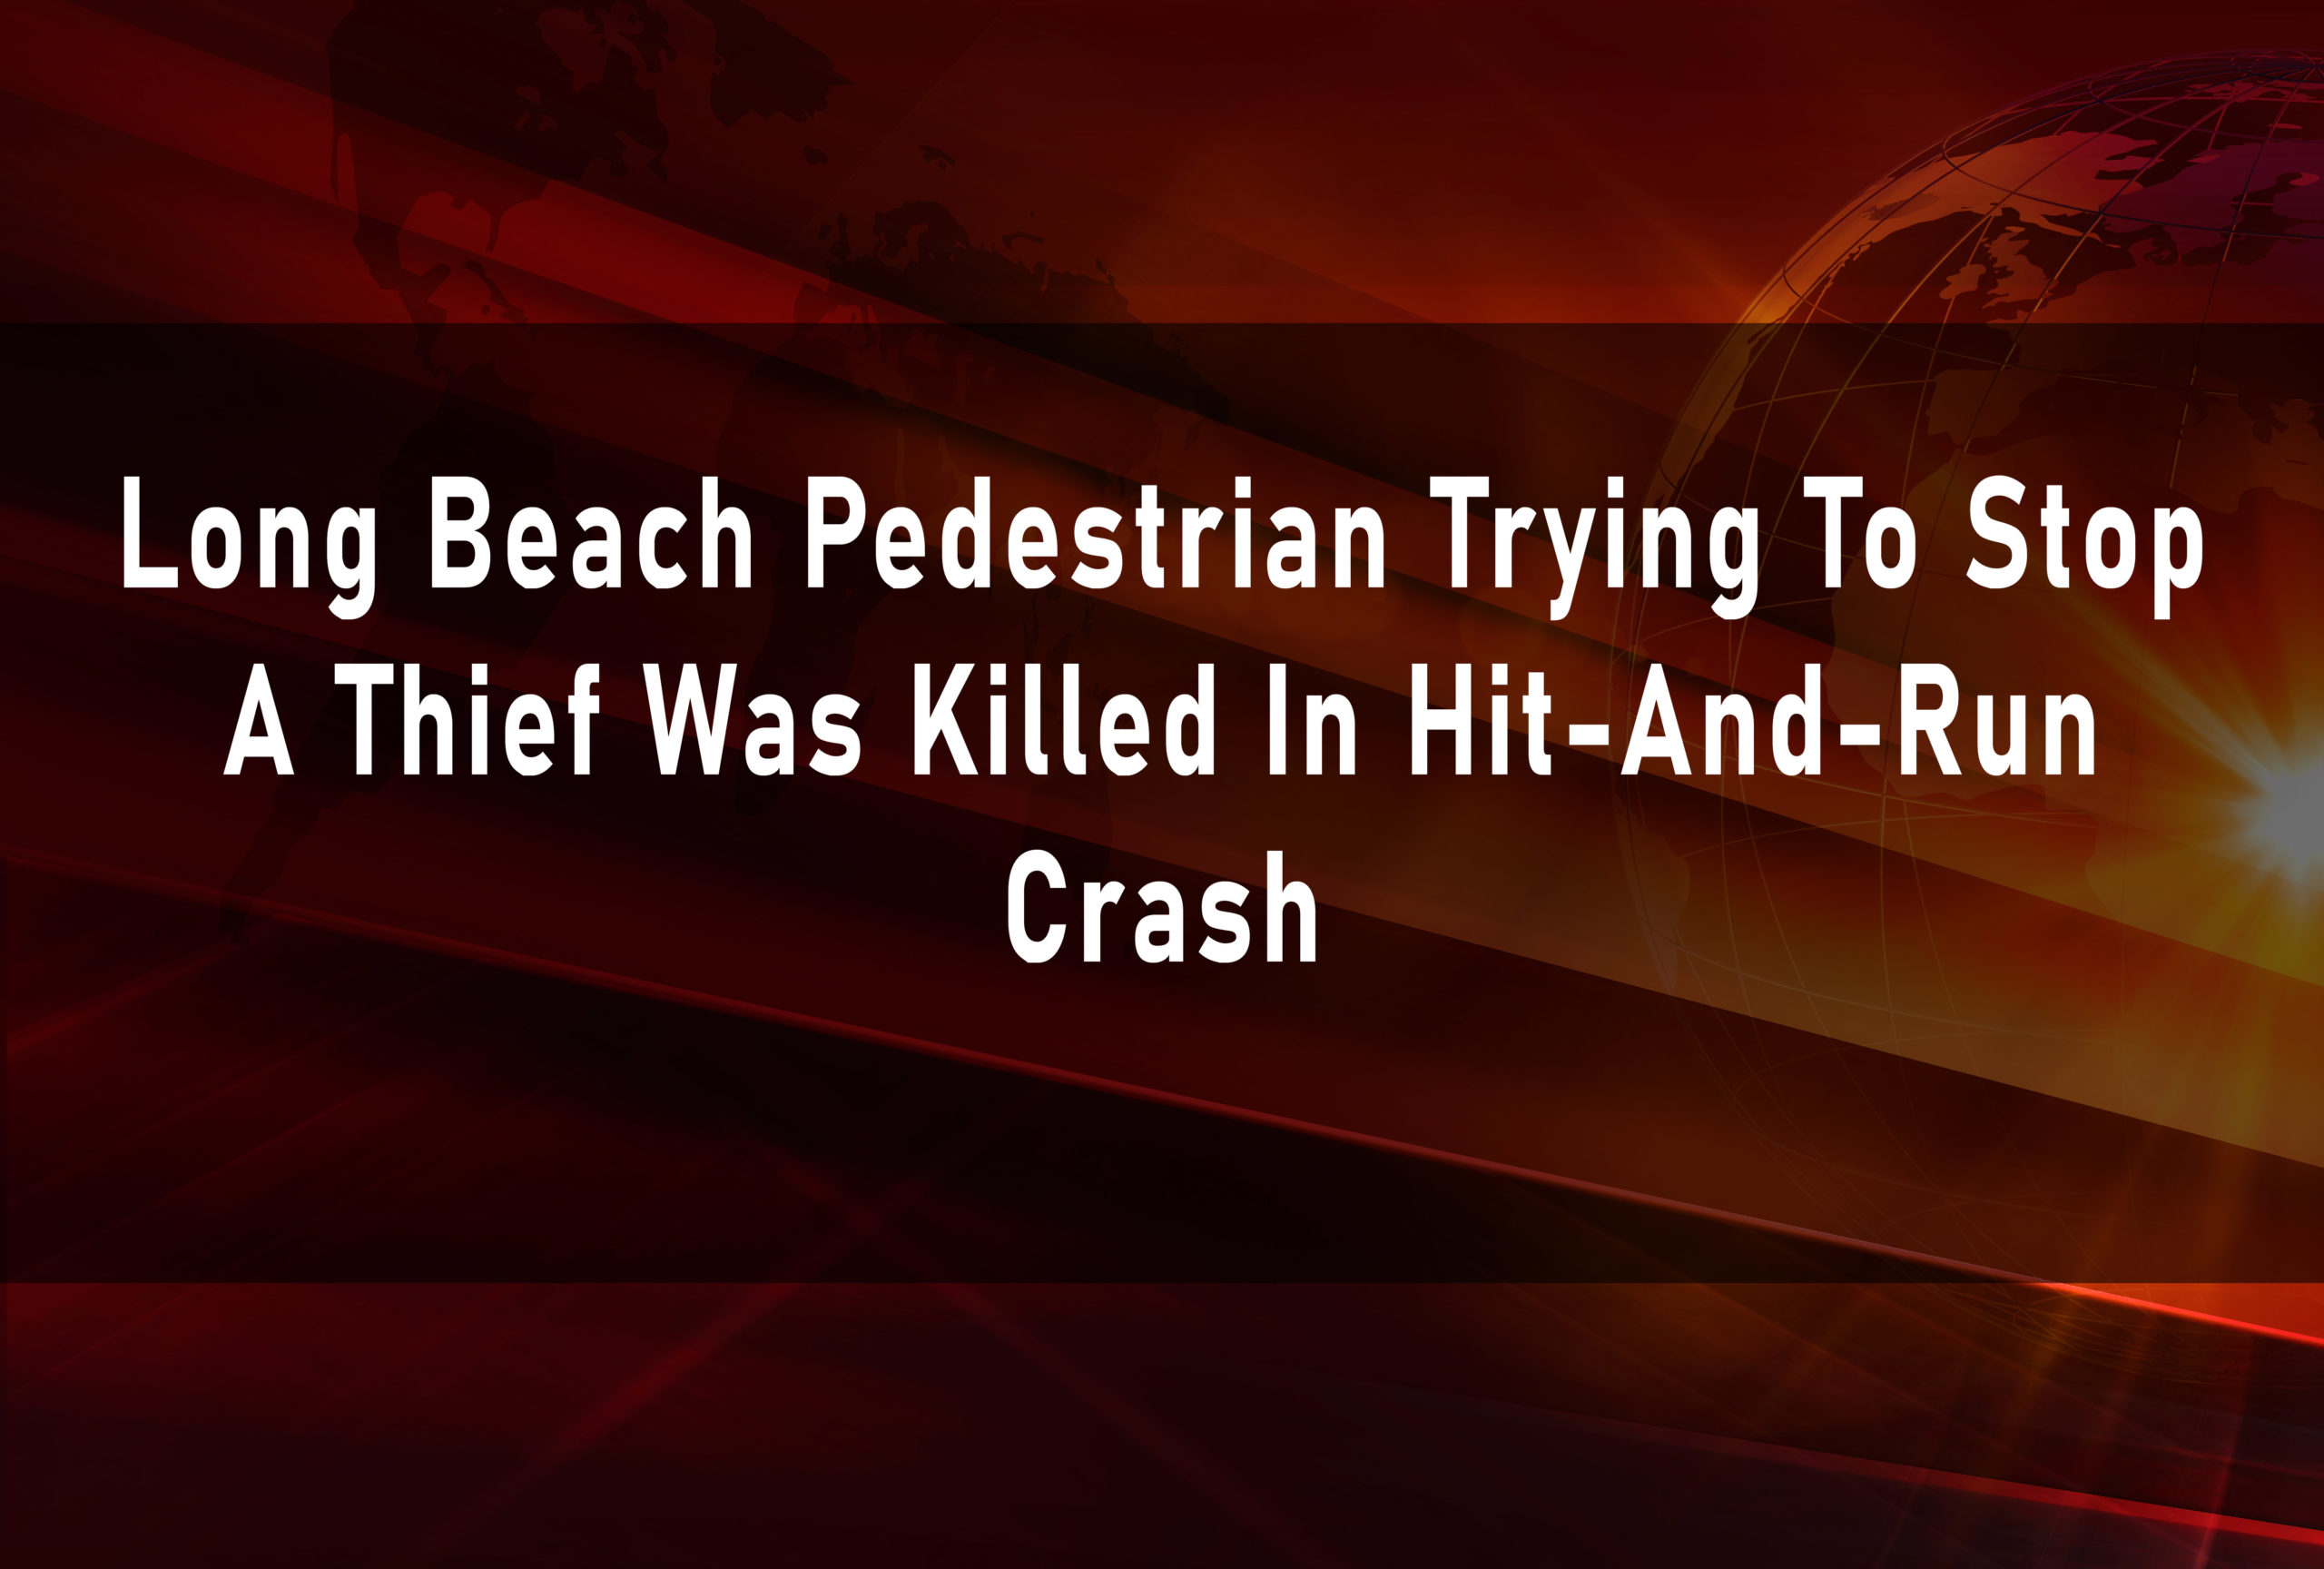 Long Beach Pedestrian Trying To Stop A Thief Was Killed In Hit-And-Run Crash